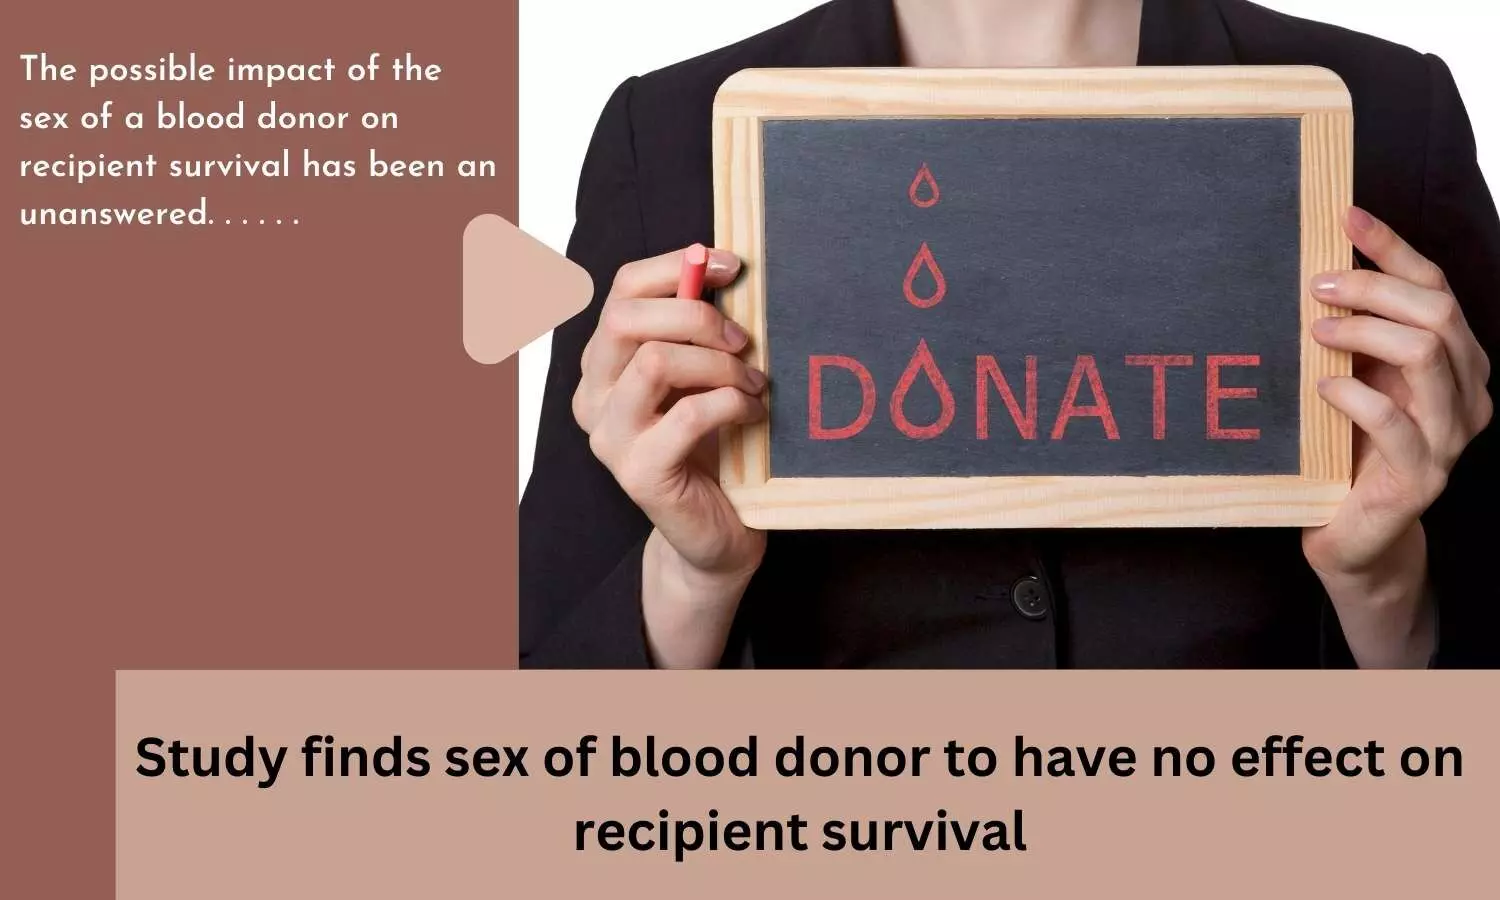 Study finds sex of blood donor to have no effect on recipient survival